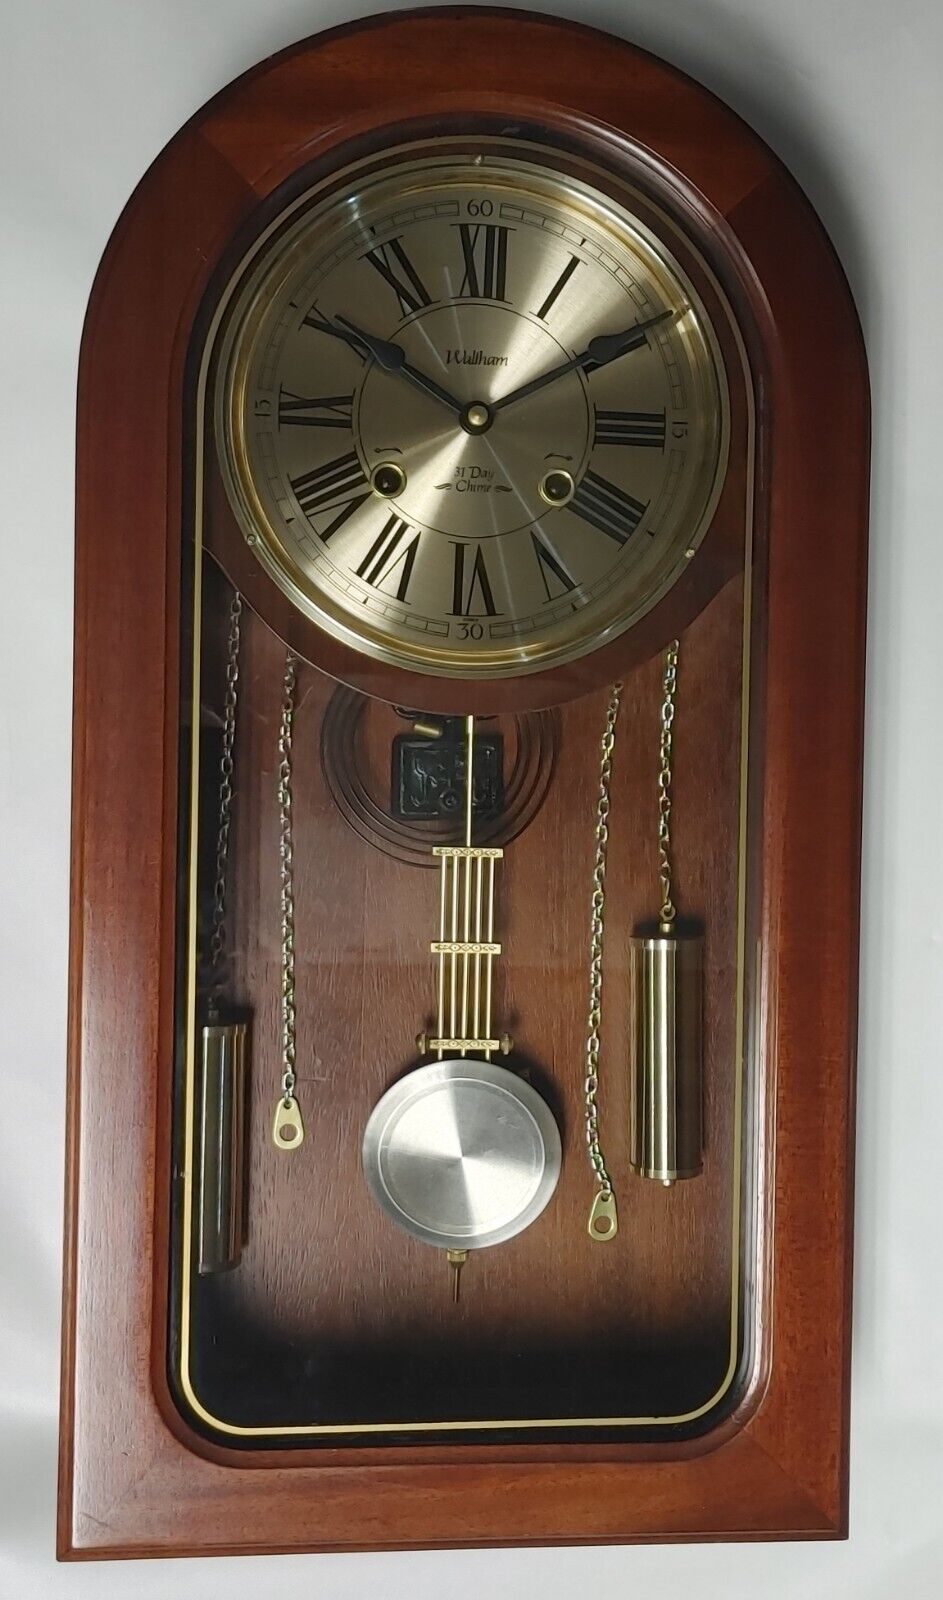 VINTAGE WALTHAM 31 DAY WINDING WALL CLOCK WITH CHIMES, MADE IN KOREA.